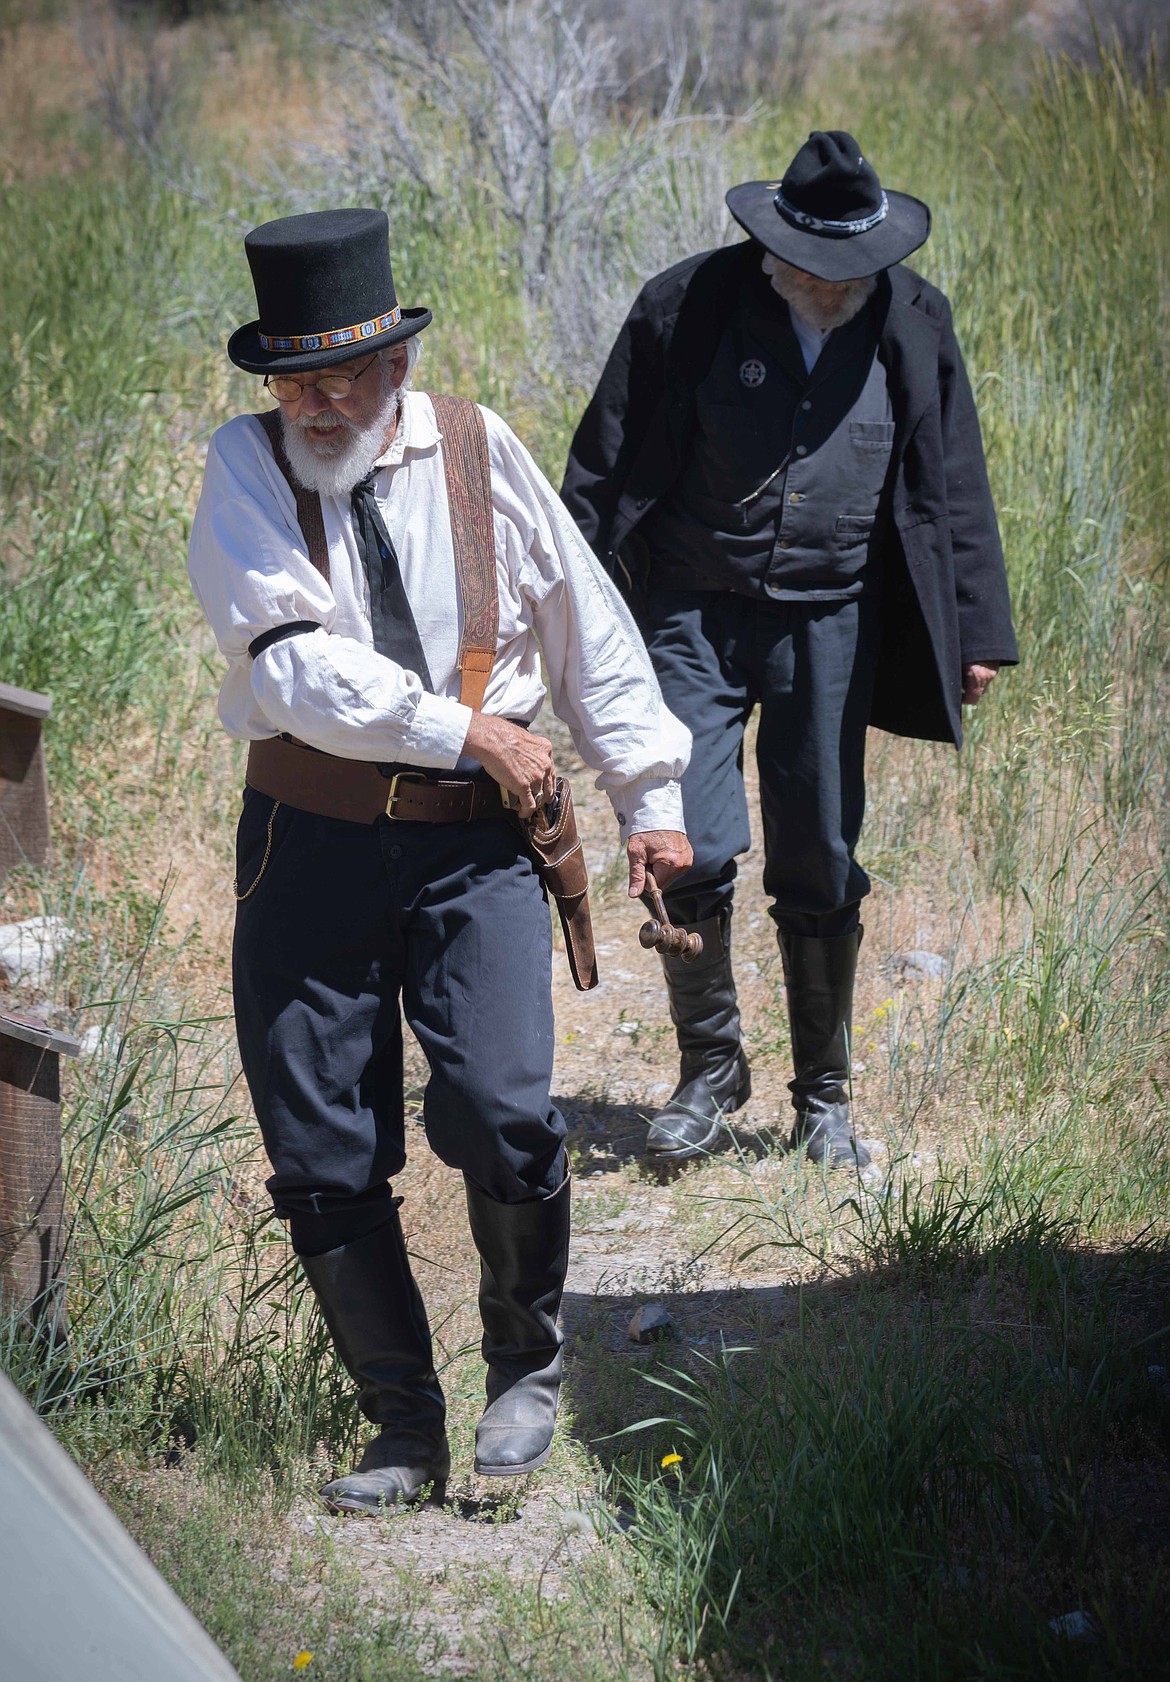 Judge Allen Williams from Wallace chases down an escaped criminal during a reenactment at Bannack State Park. (Tracy Scott/Valley Press)